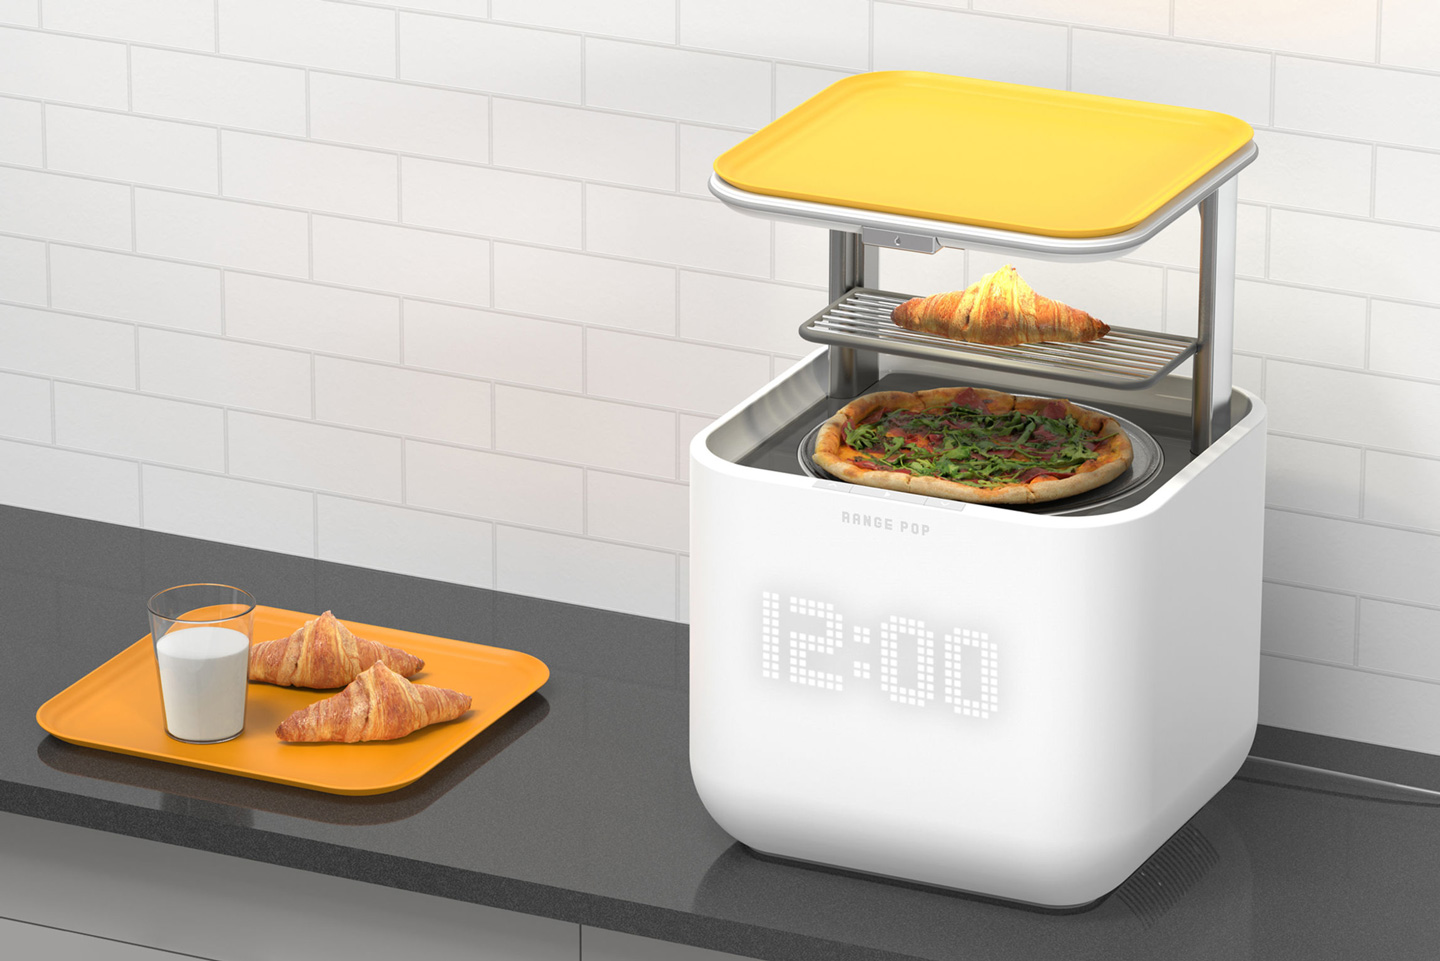 #Unique microwave oven design comes with a vertical-popping tray, like a toaster